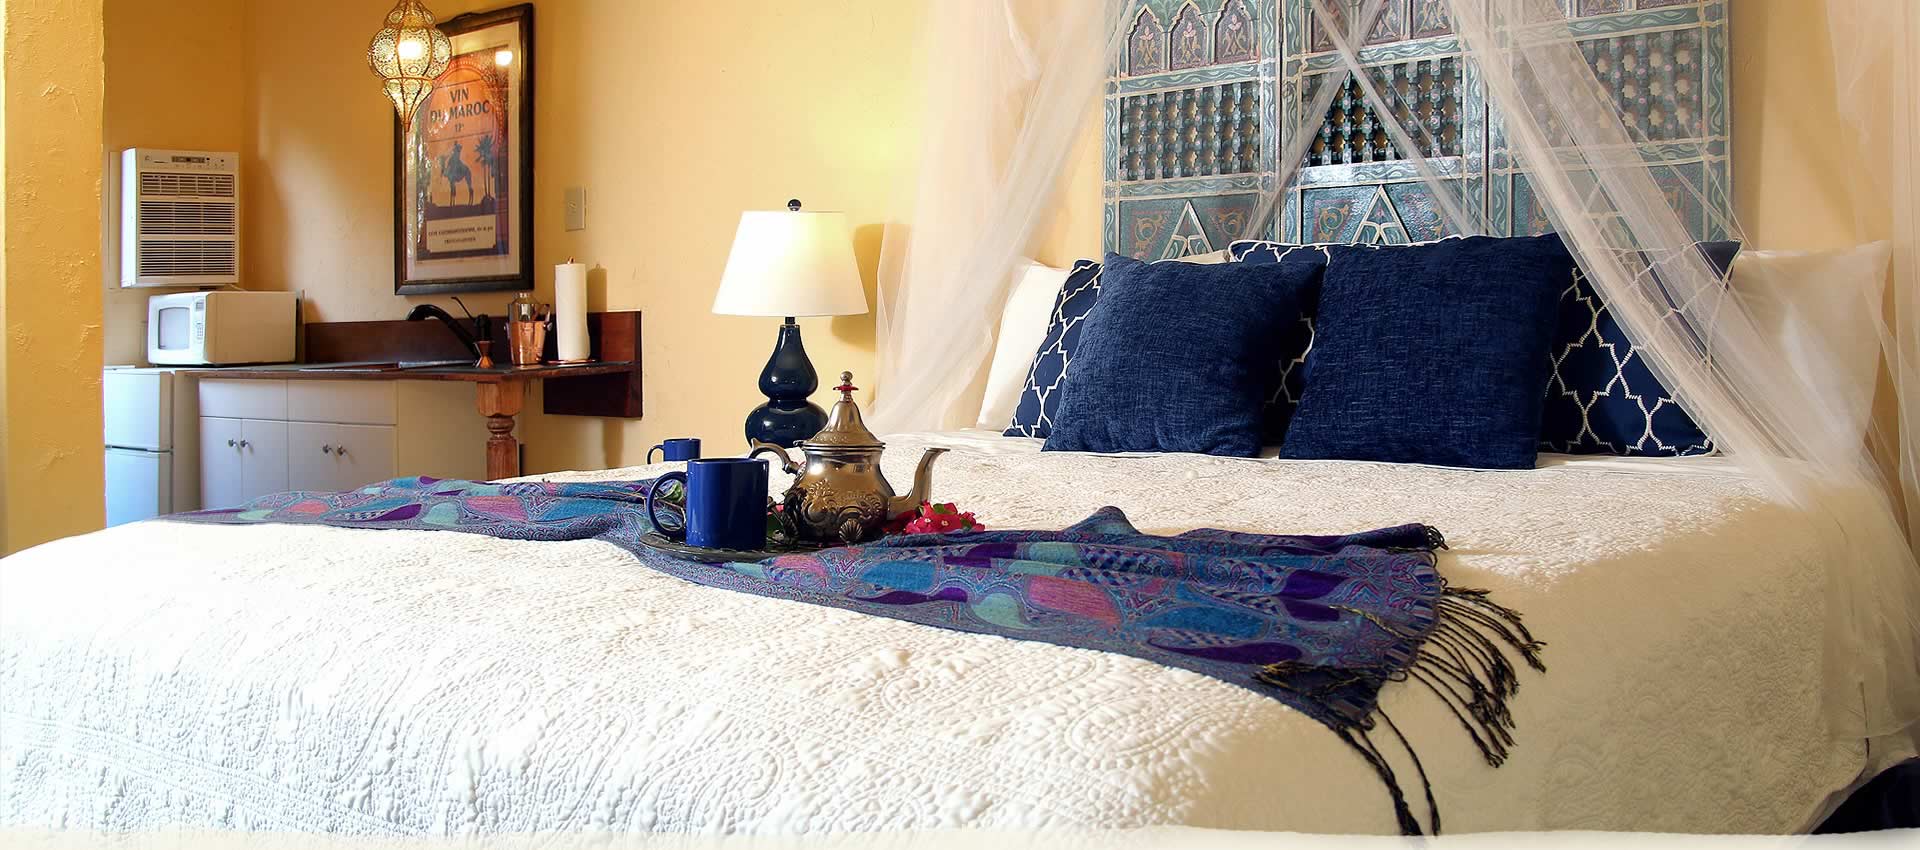 Private King Room bed with tea service and decorative pillows